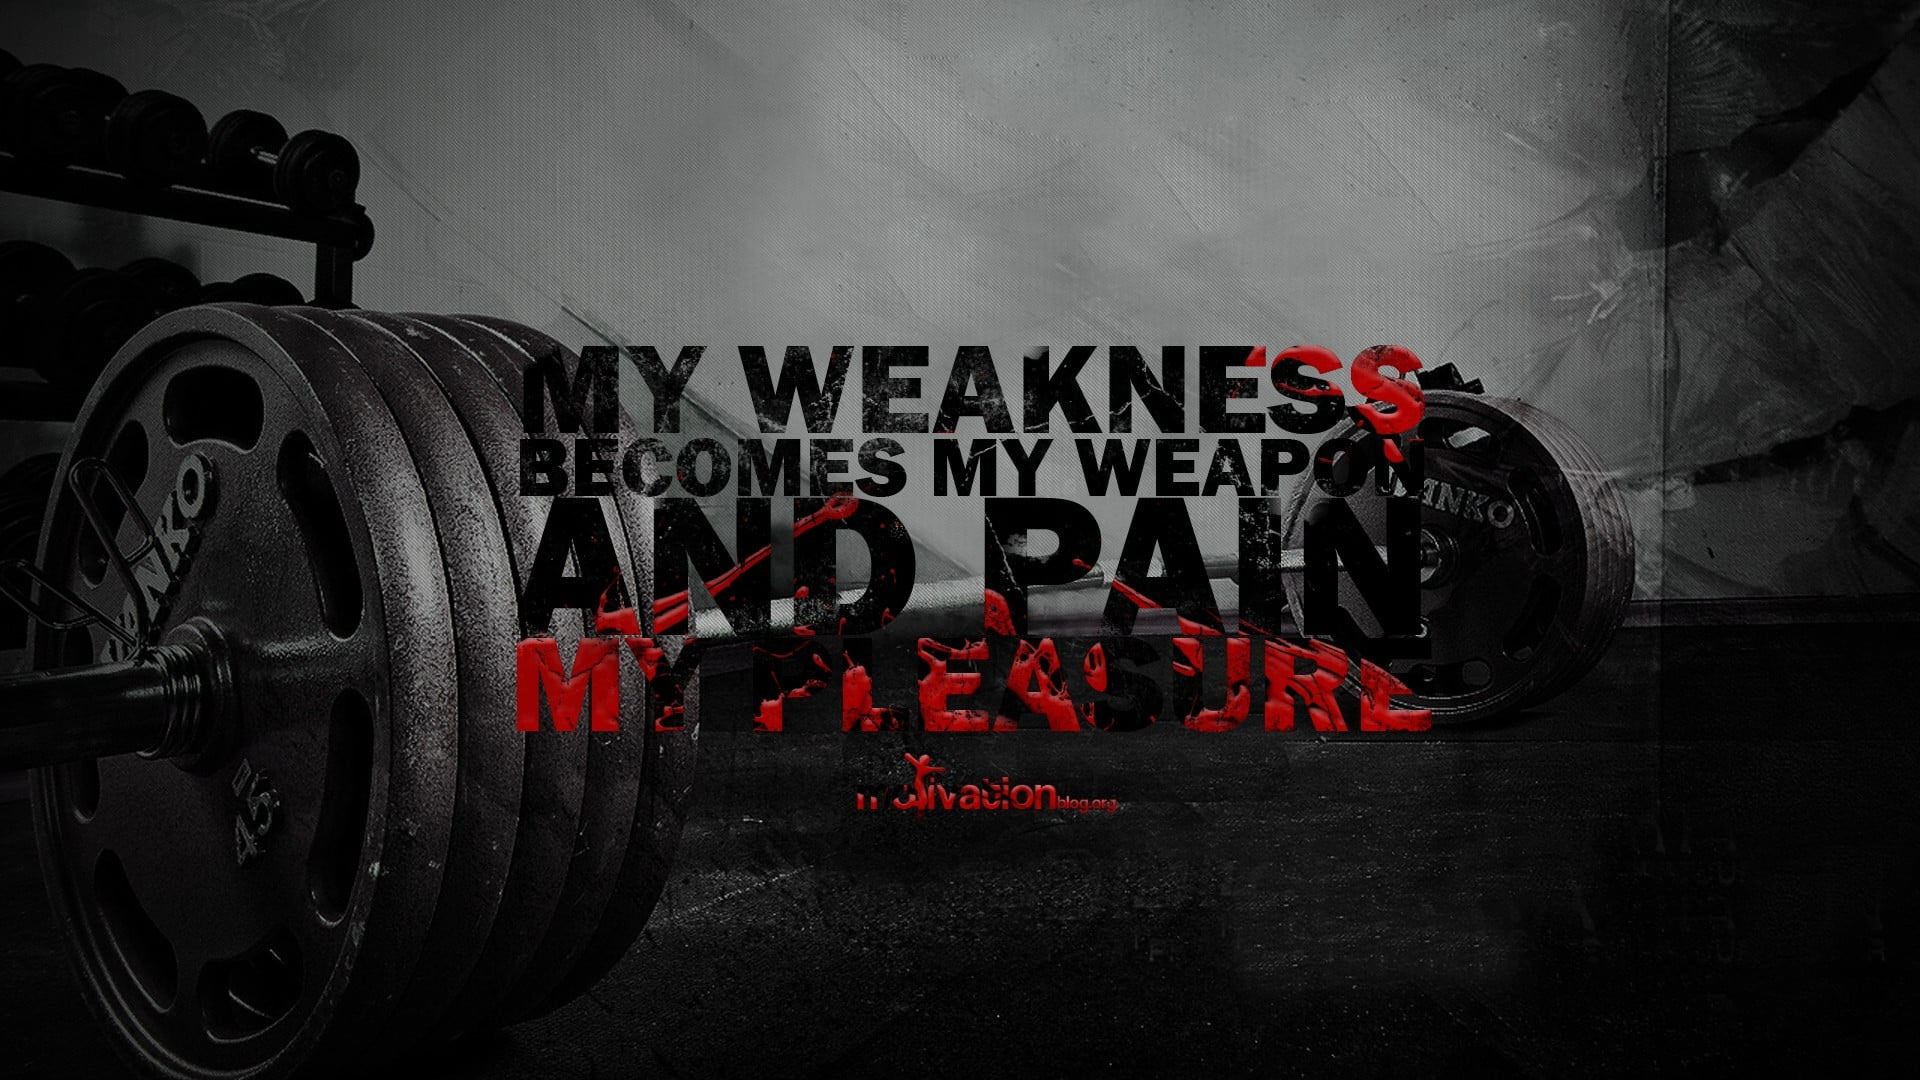 Wallpaper My Weakness Becomes My Weapon And Pain Text